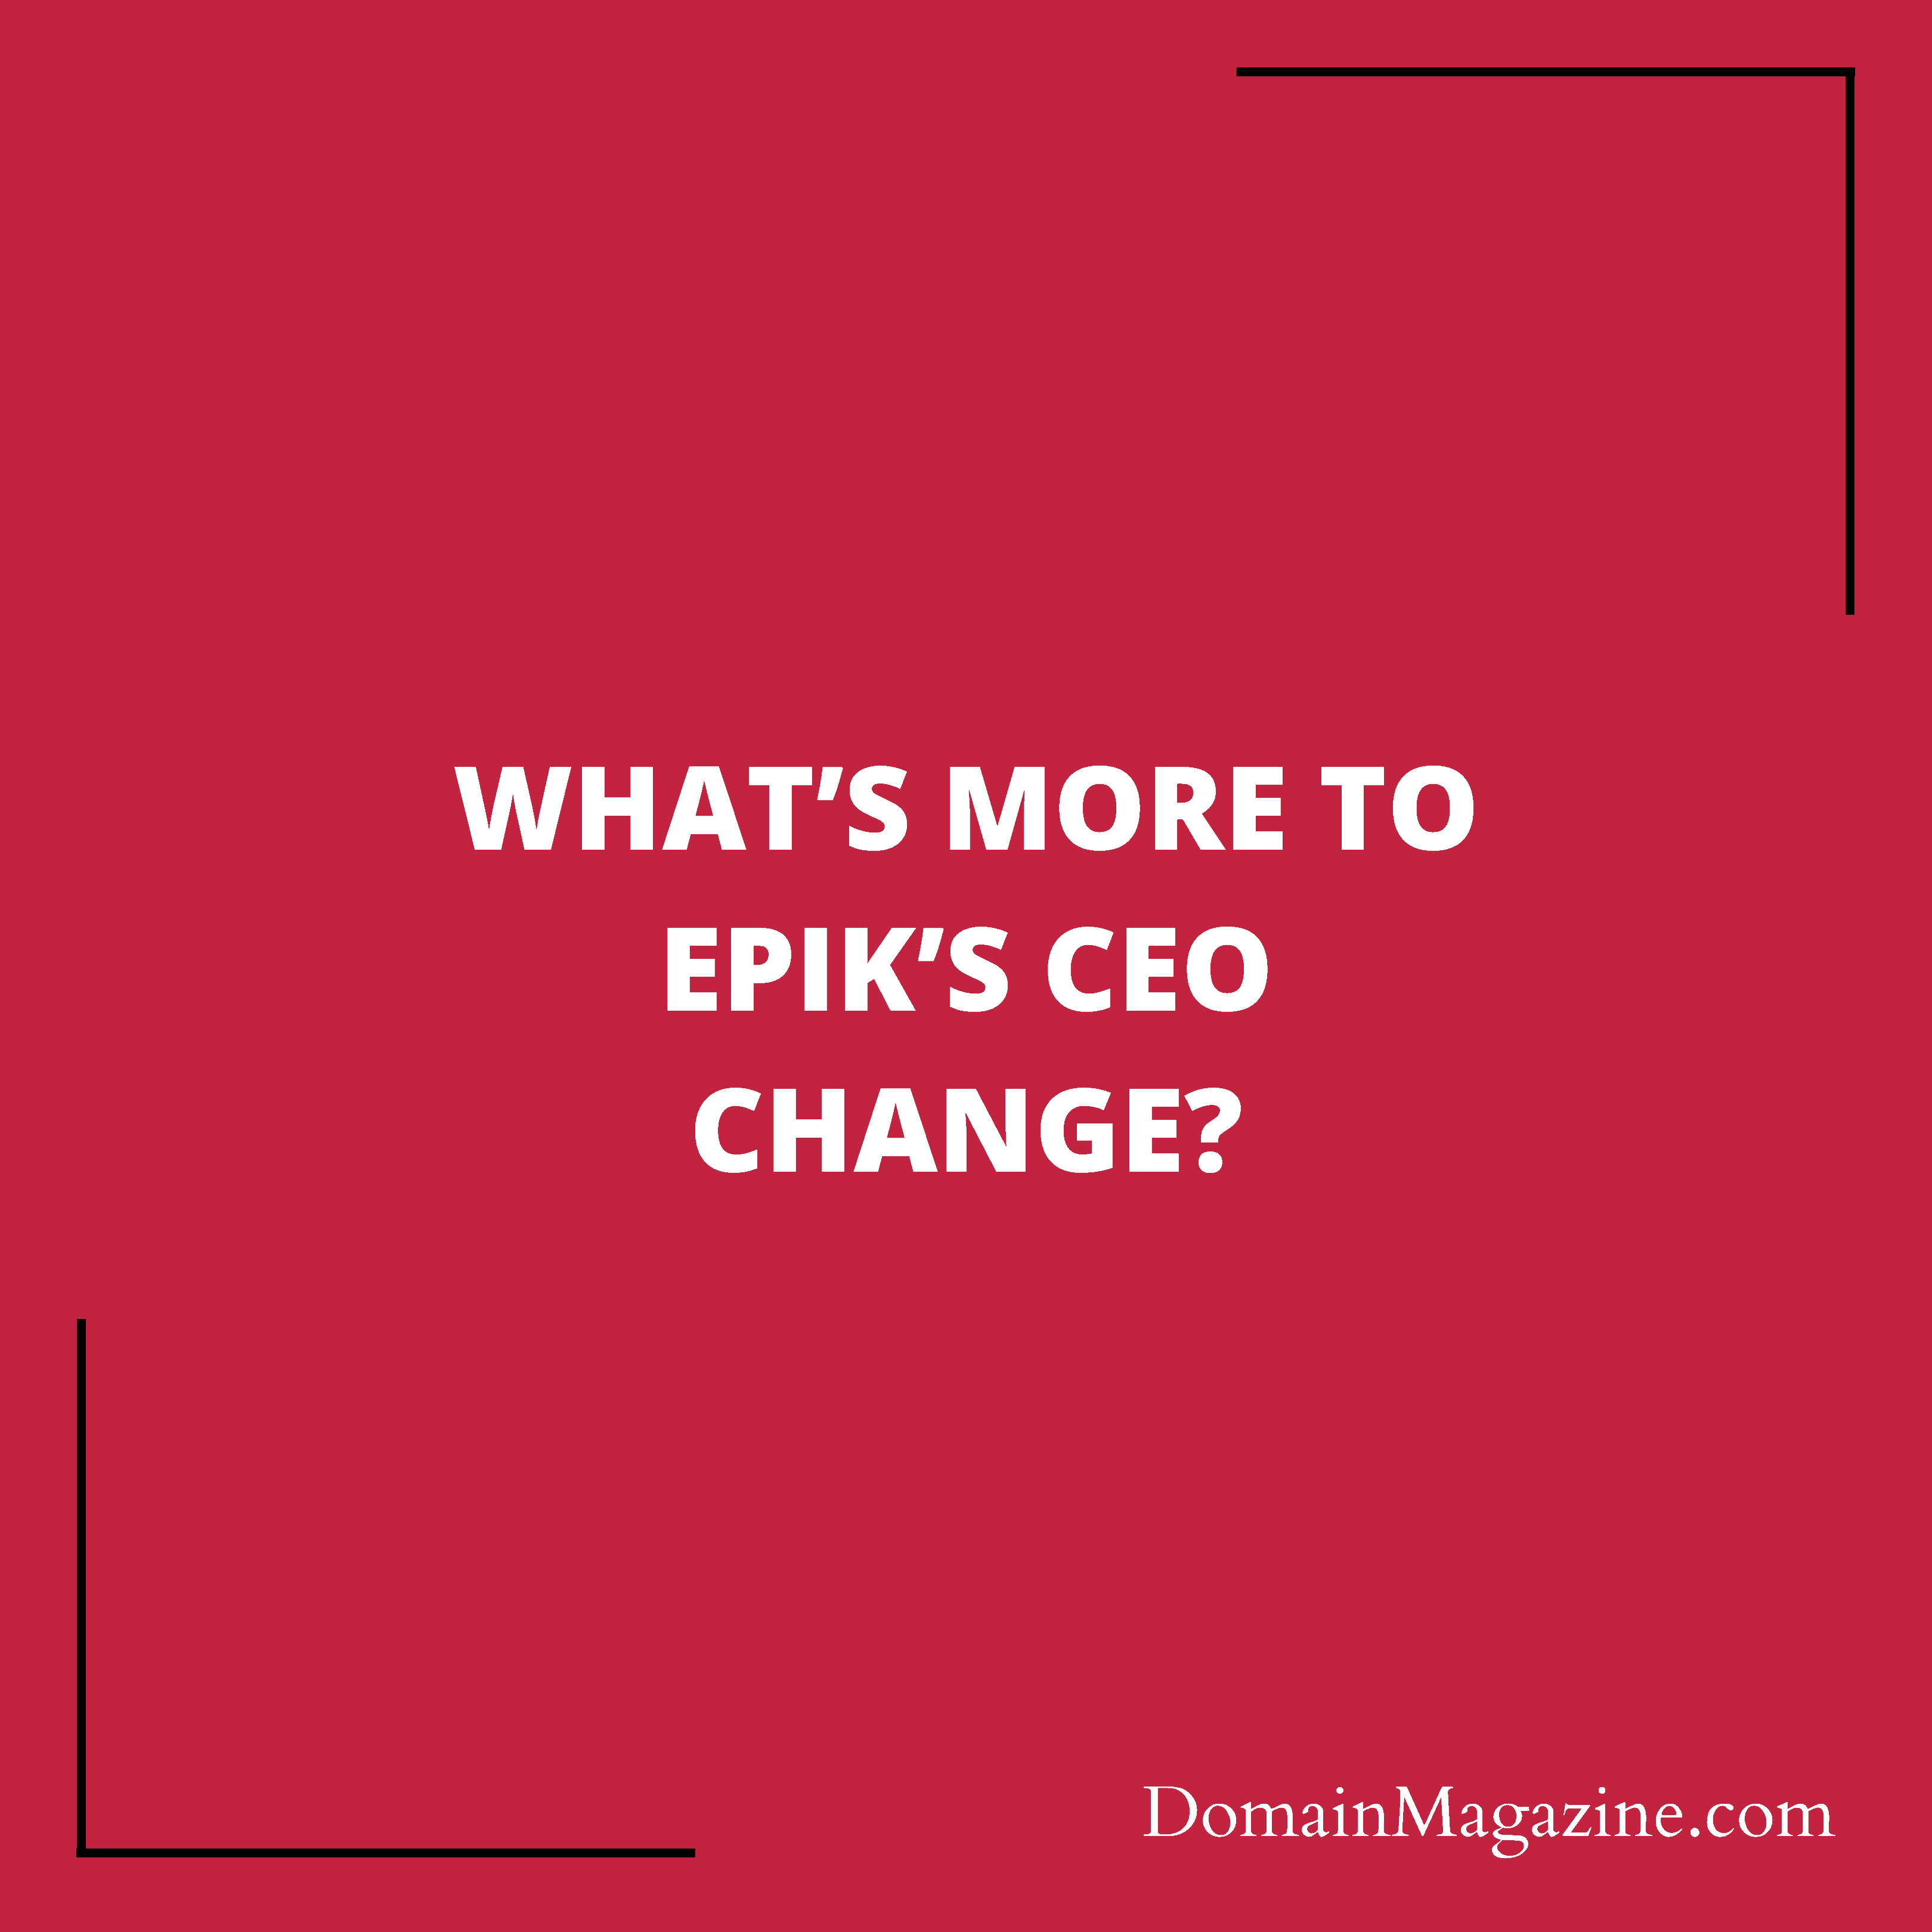 What’s more to Epik’s CEO change?